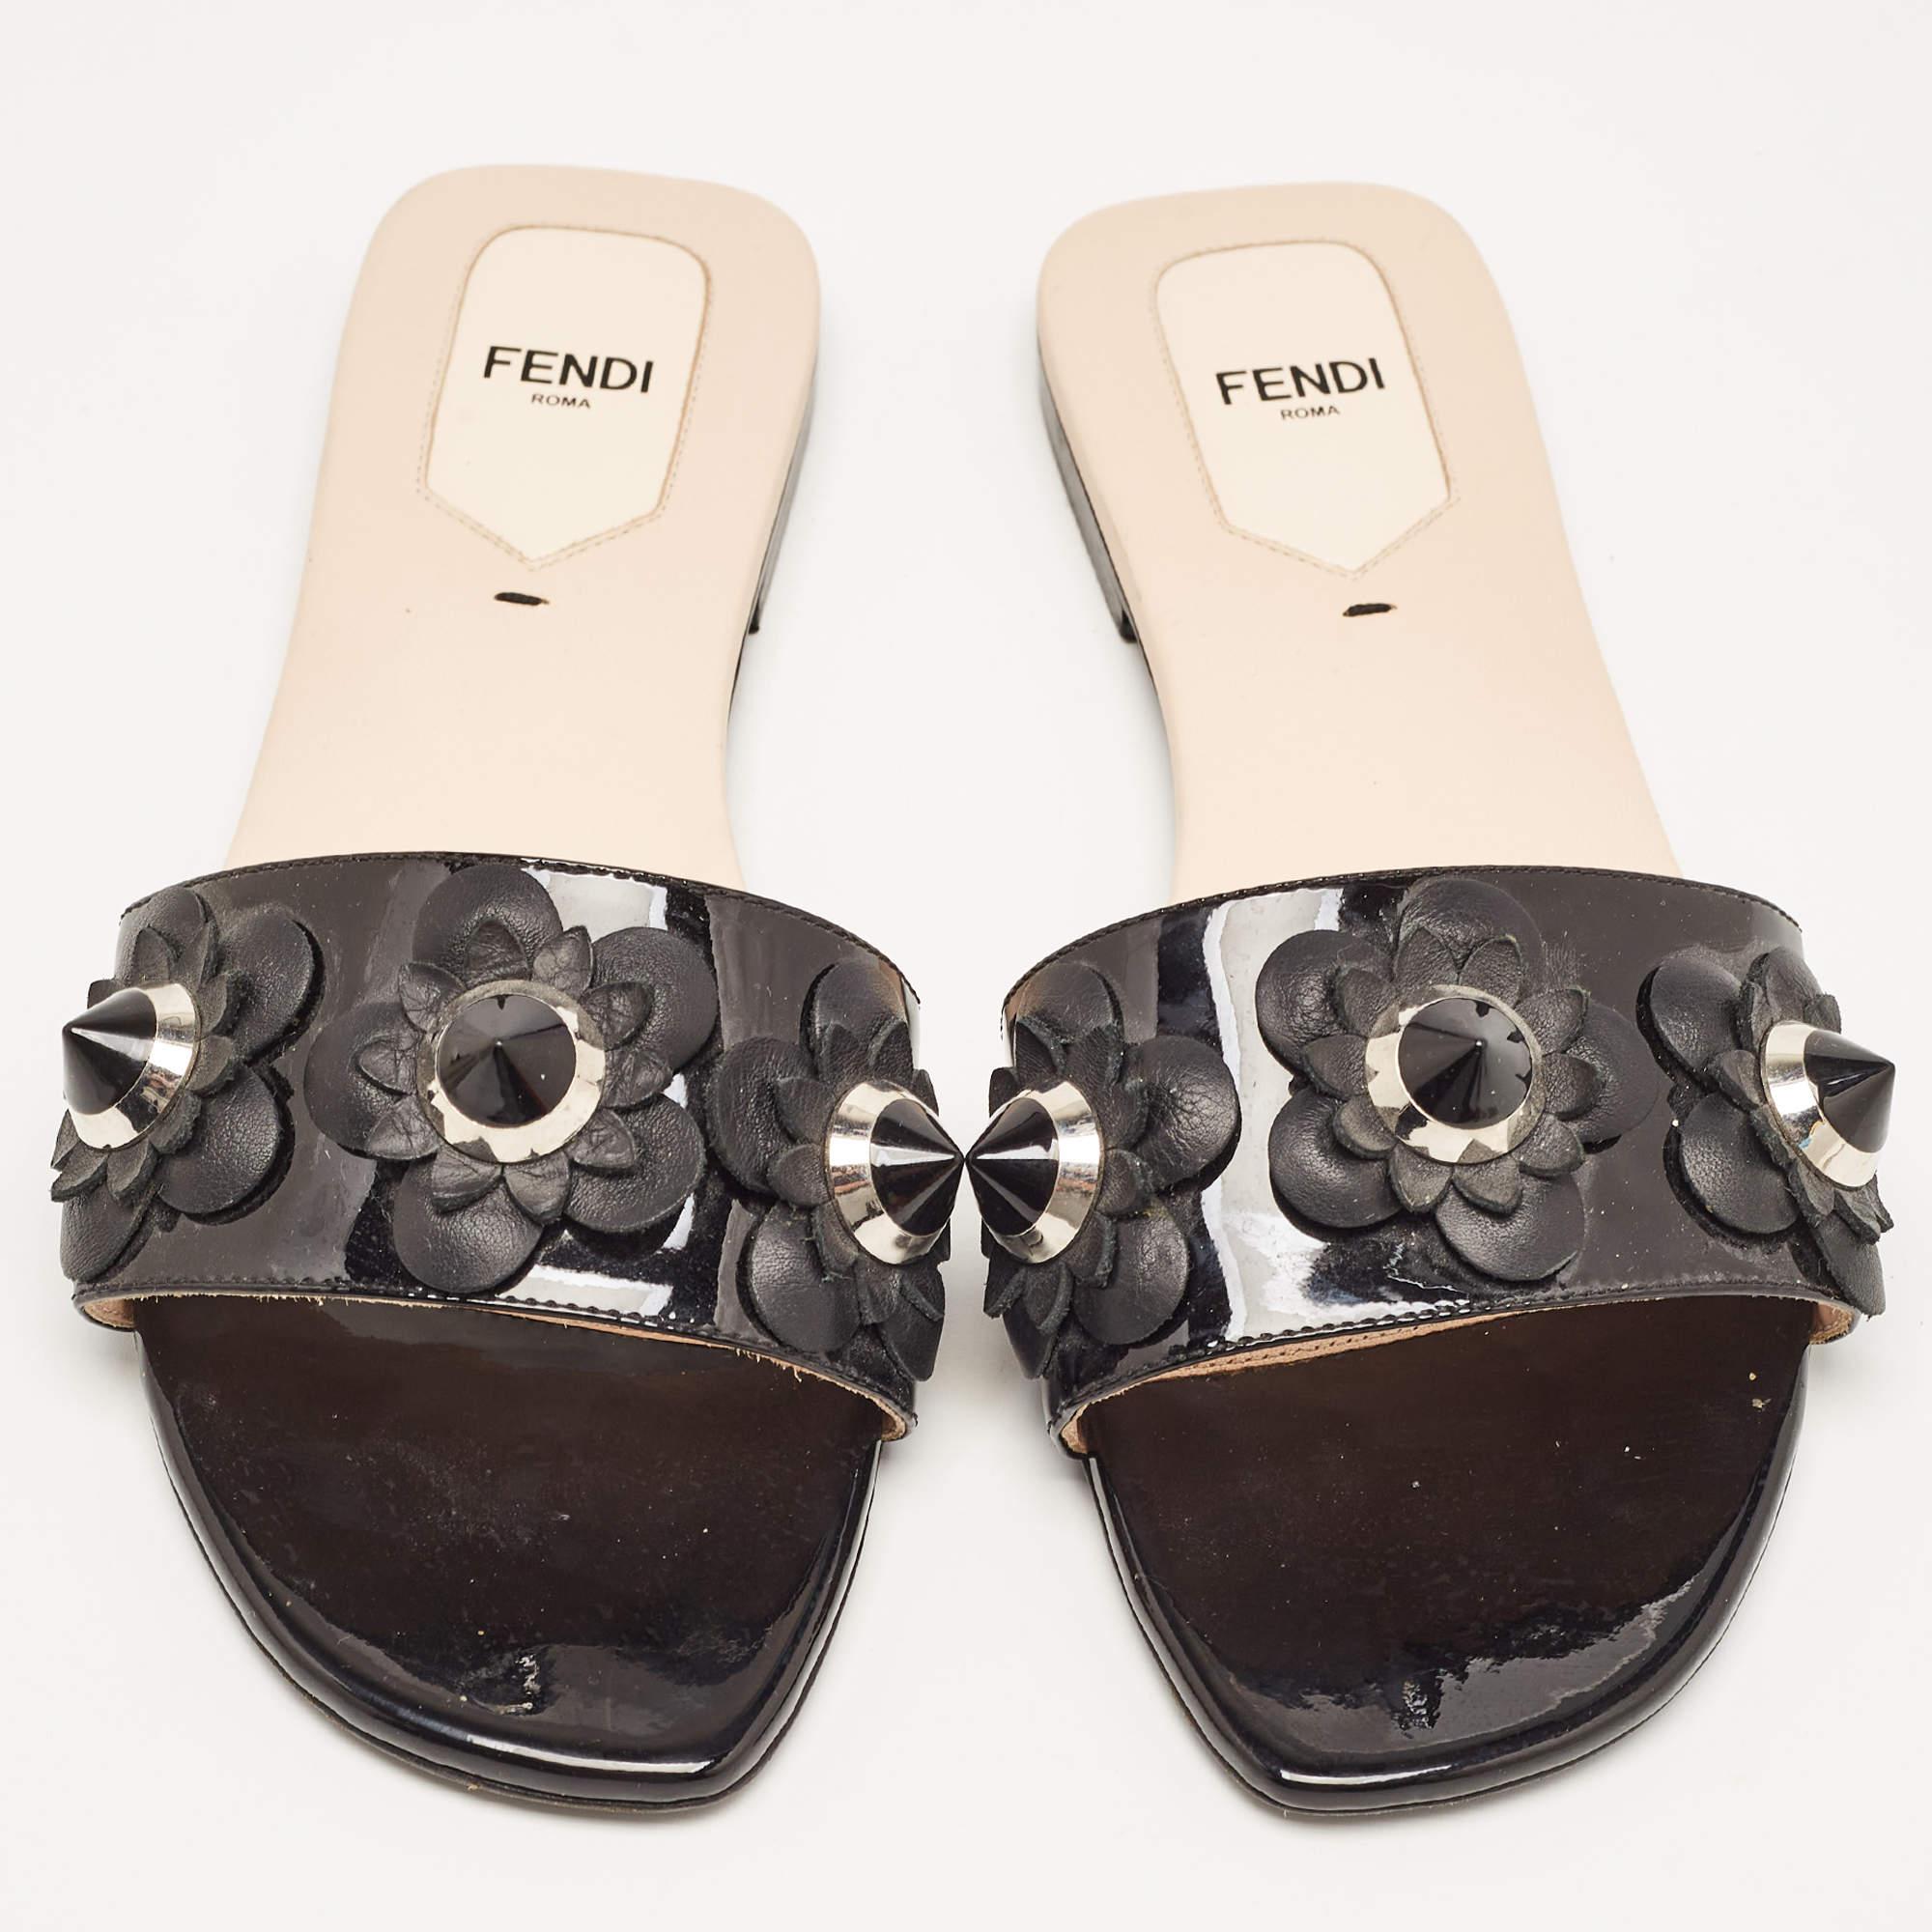 Create effortless styles with these Fendi slides. Made of quality materials, they are designed to elevate your OOTD and keep you in comfort all day long.

Includes: Original Dustbag, Original Box, Info Booklet